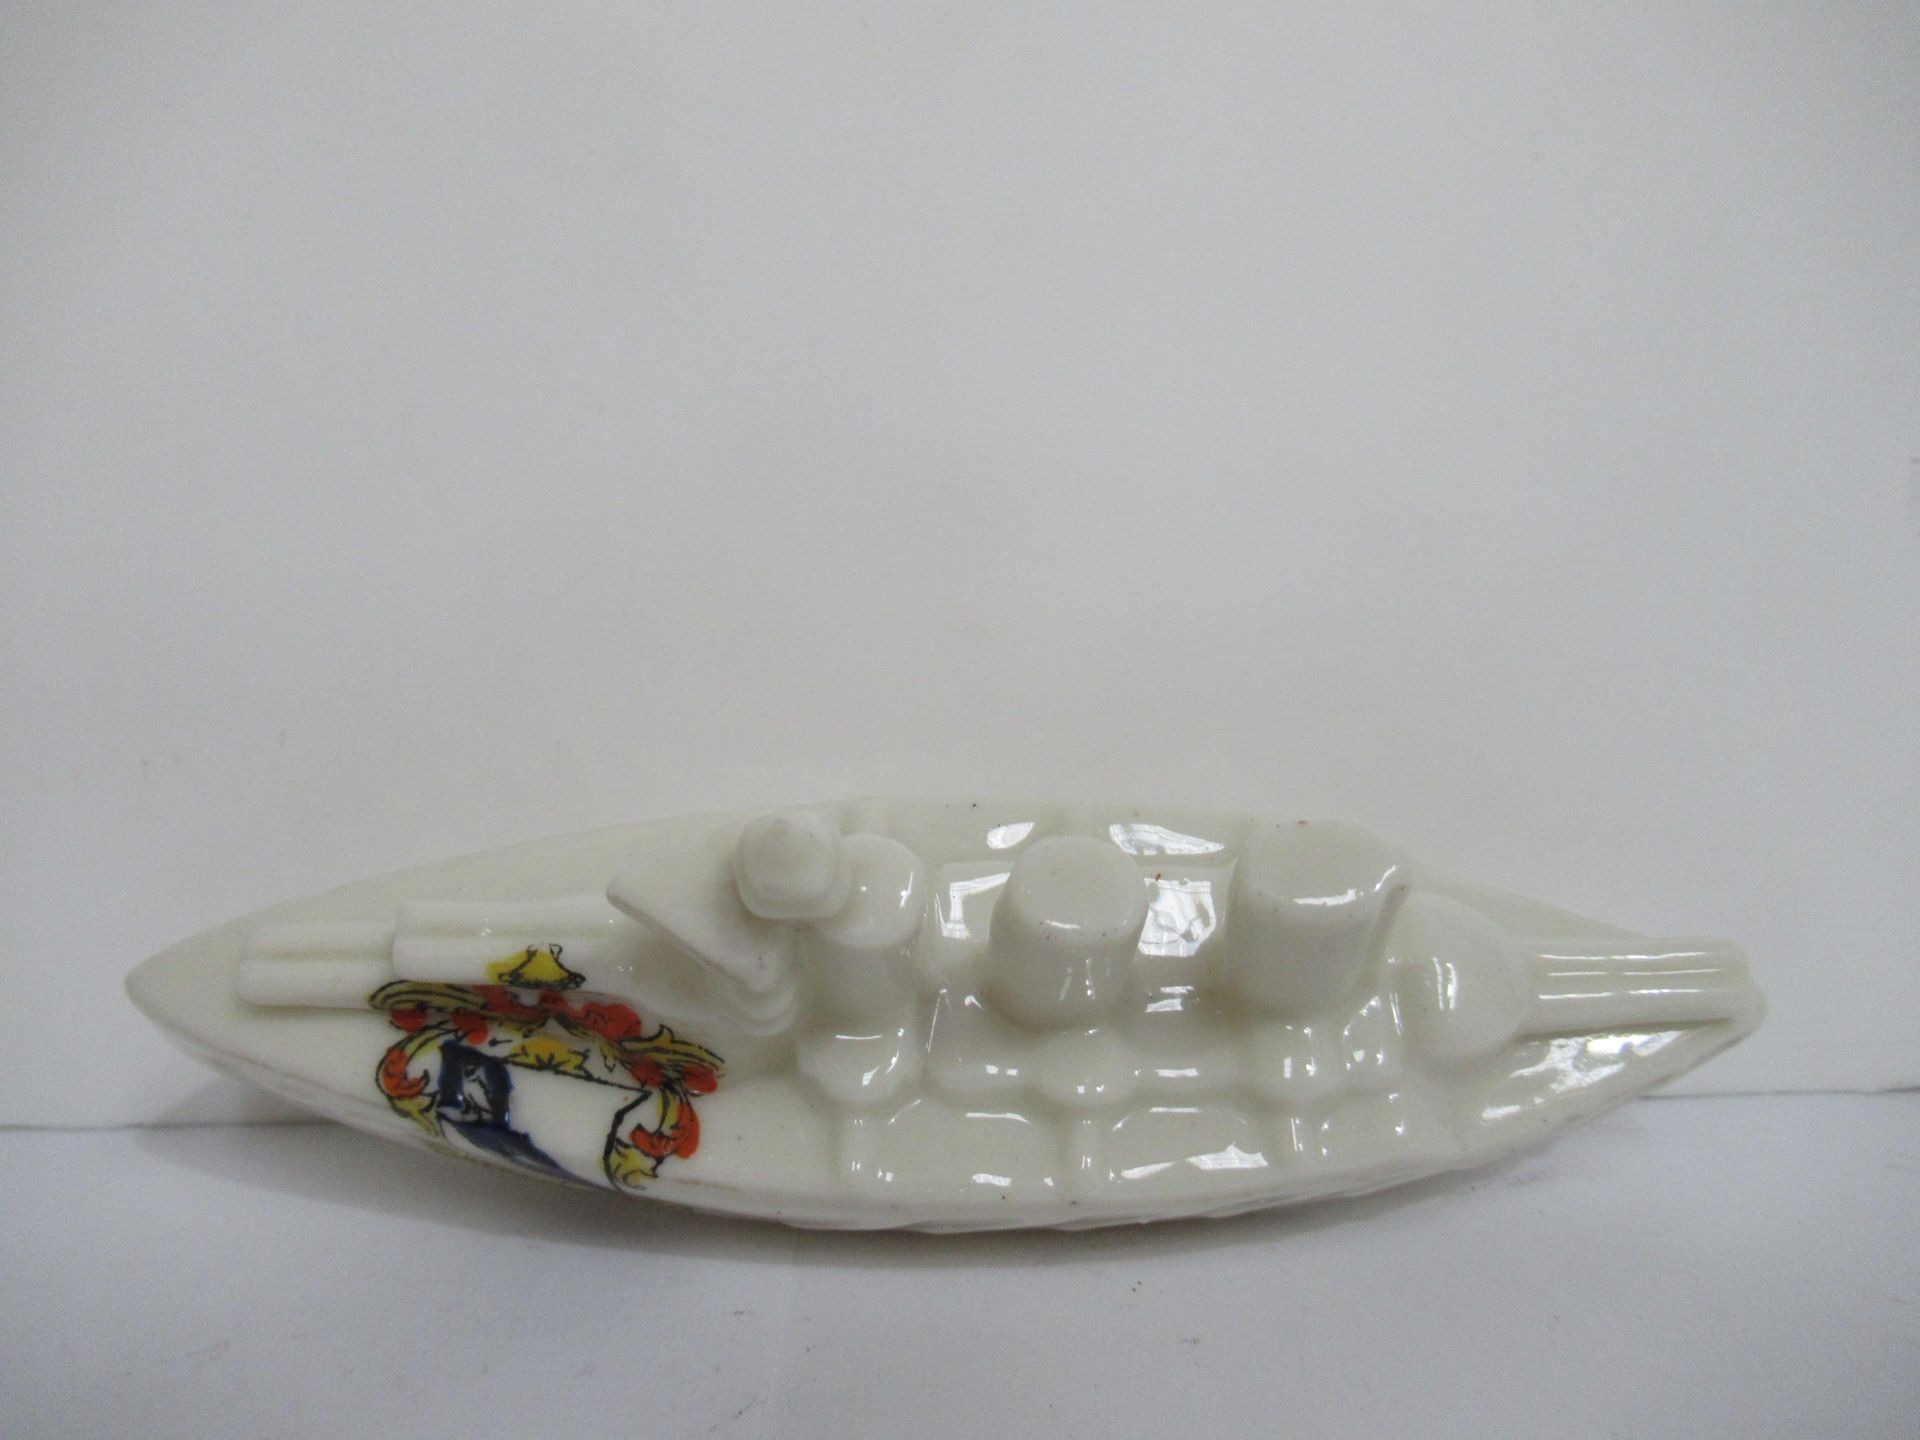 Crested China model of battleship with Cleethorpes coat of arms (120mm x 65mm) - Bild 5 aus 8